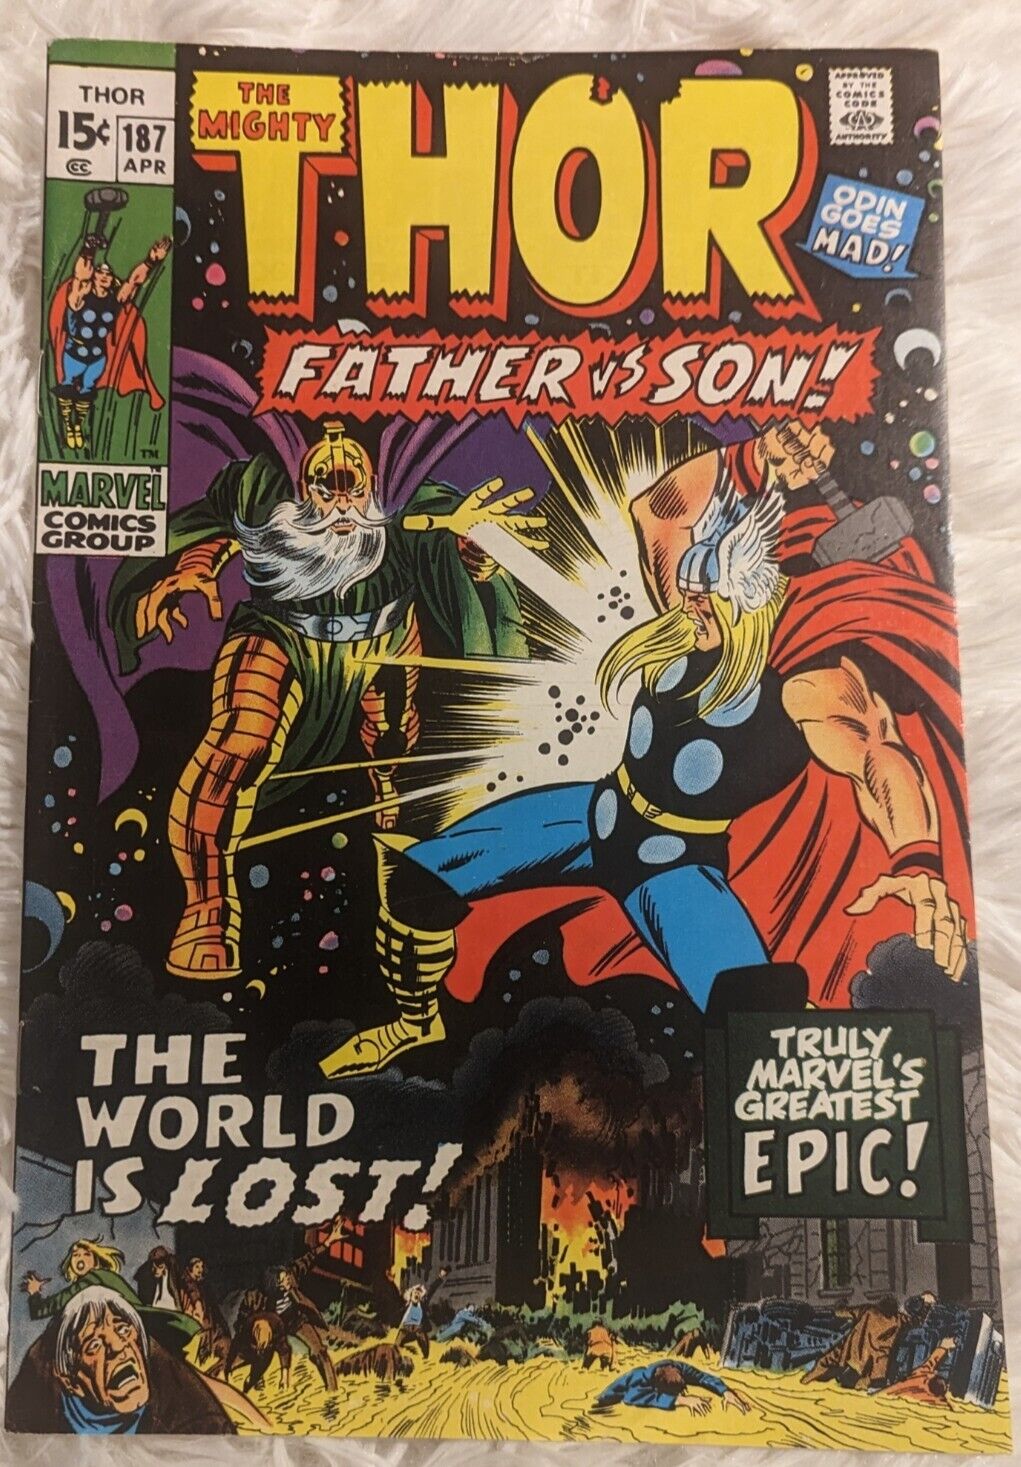 THE MIGHTY THOR # 187 Vintage Comic Book